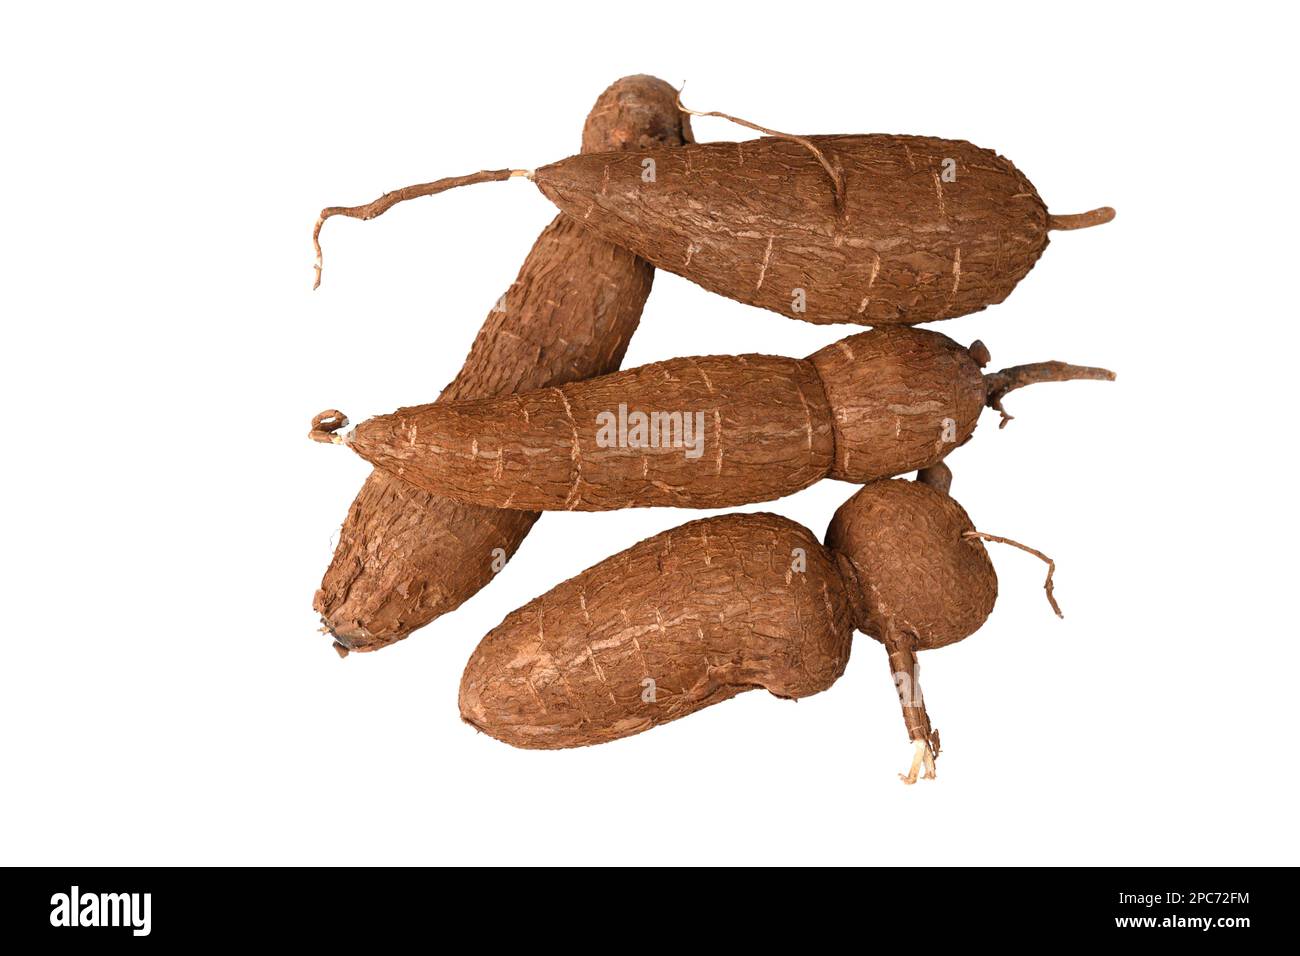 Organic Cassava tuber isolated on white background. View from above. Raw Yucca cassava root. Tropical harvest. Stock Photo